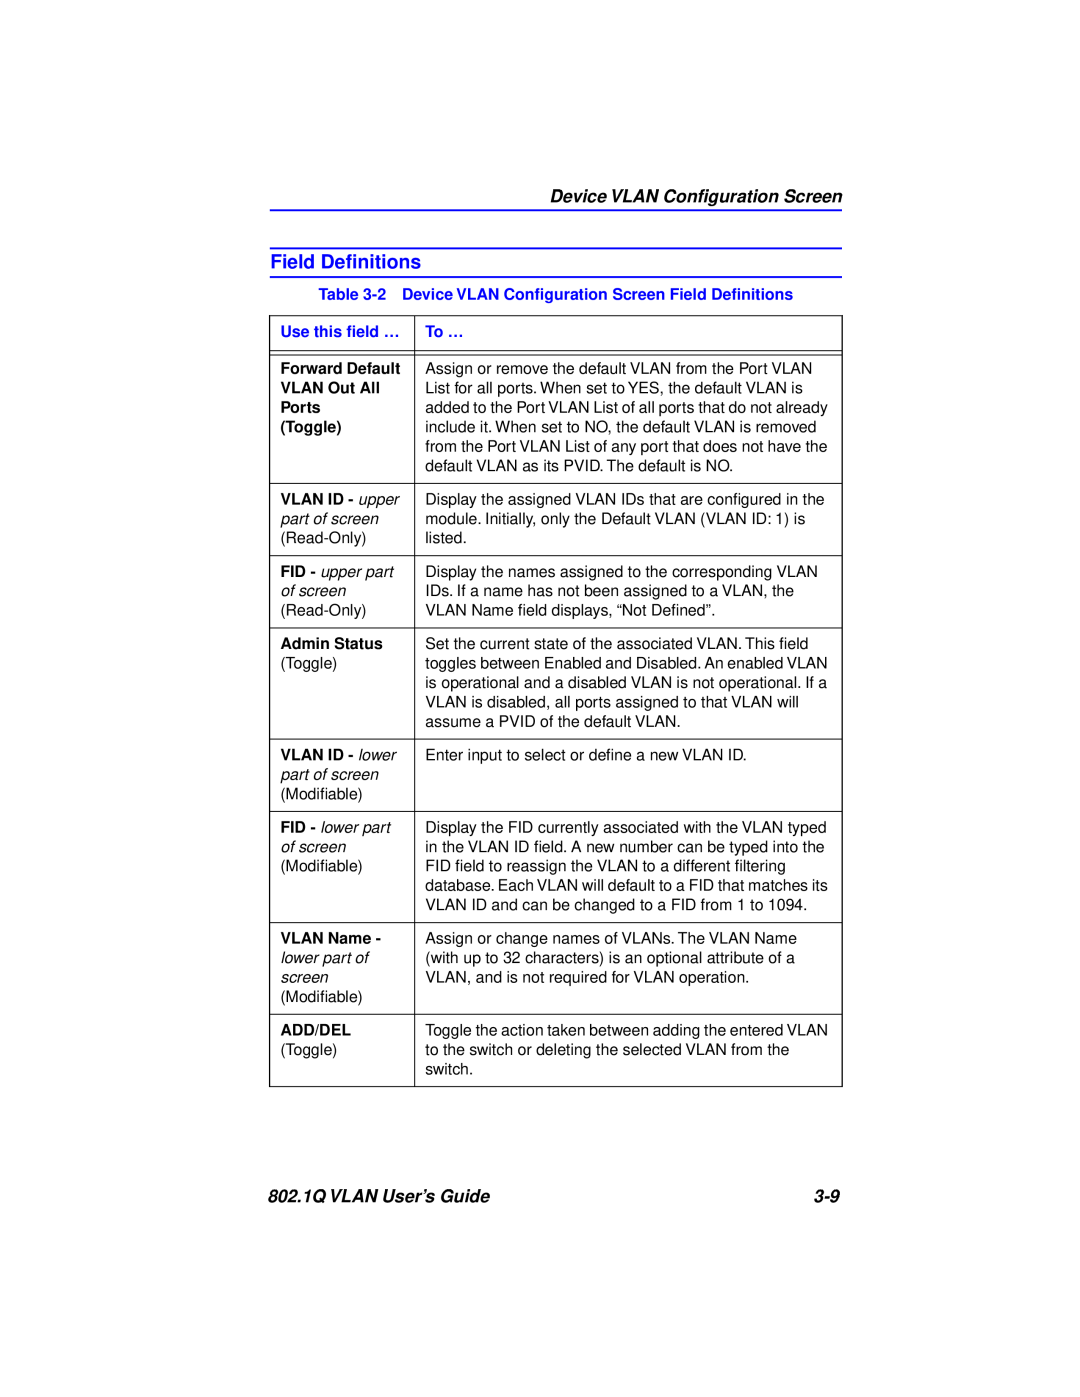 Cabletron Systems Field Deﬁnitions, Device VLAN Conﬁguration Screen, 802.1Q VLAN User’s Guide, Use this ﬁeld …, To … 